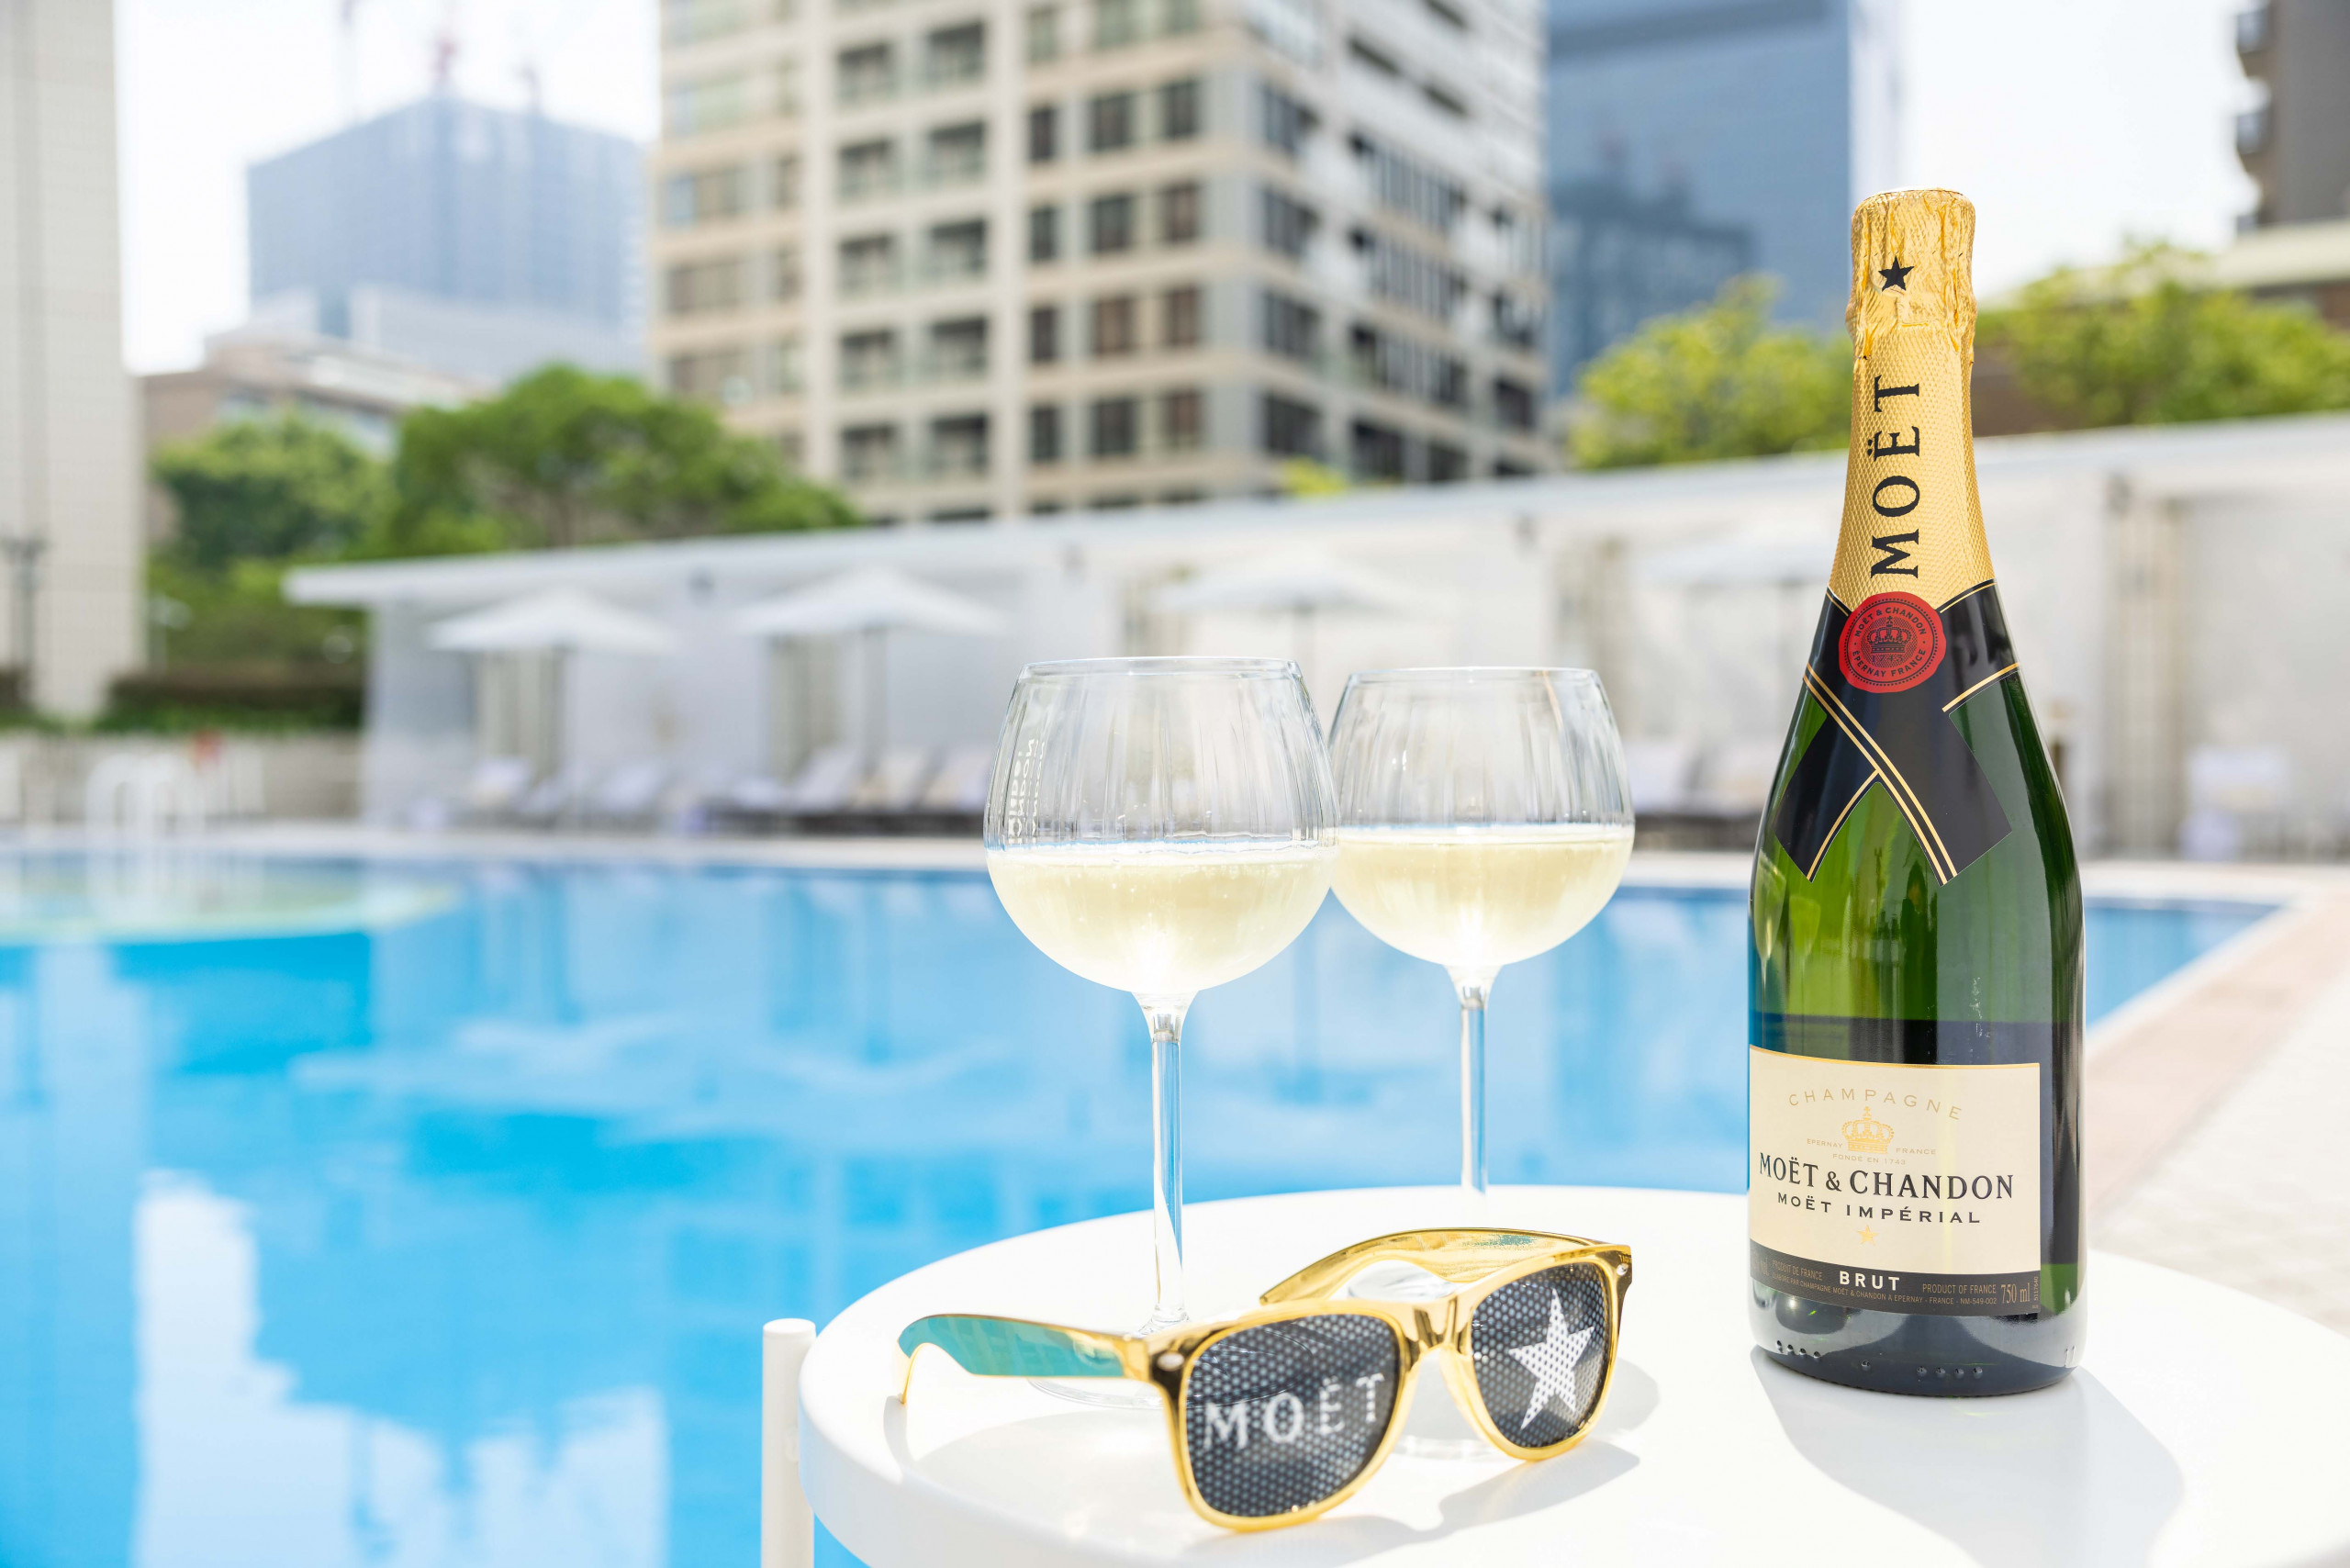 Poolside Lounge with Moët & Chandon